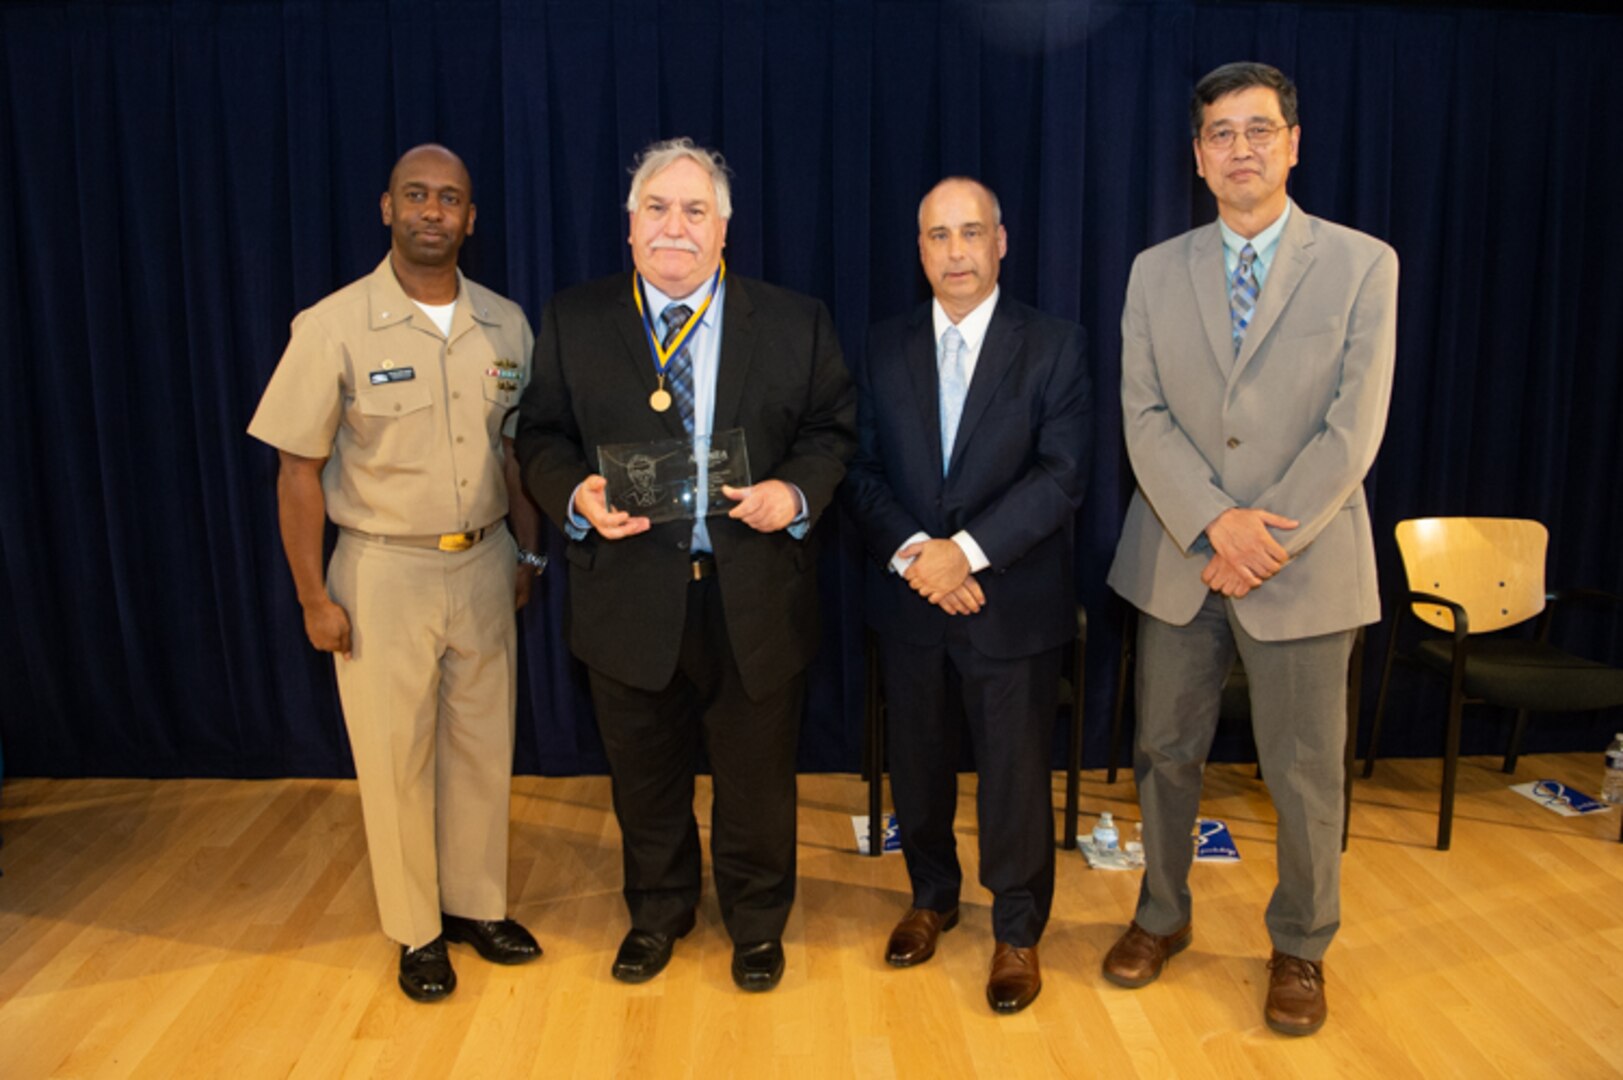 Dr. John Holmes, senior scientific technical manager for underwater electromagnetics, receives the inaugural Dr. Murray Strasberg Award the Naval Surface Warfare Center, Carderock Division Honor Awards on Sept. 10, 2019, in West Bethesda, Md. With Holmes is Commanding Officer Capt. Cedric McNeal, Technical Director Larry Tarasek and Ship Signatures Department Head Dr. Paul Shang. (U.S. Navy photo by Nicholas Brezzell/Released)